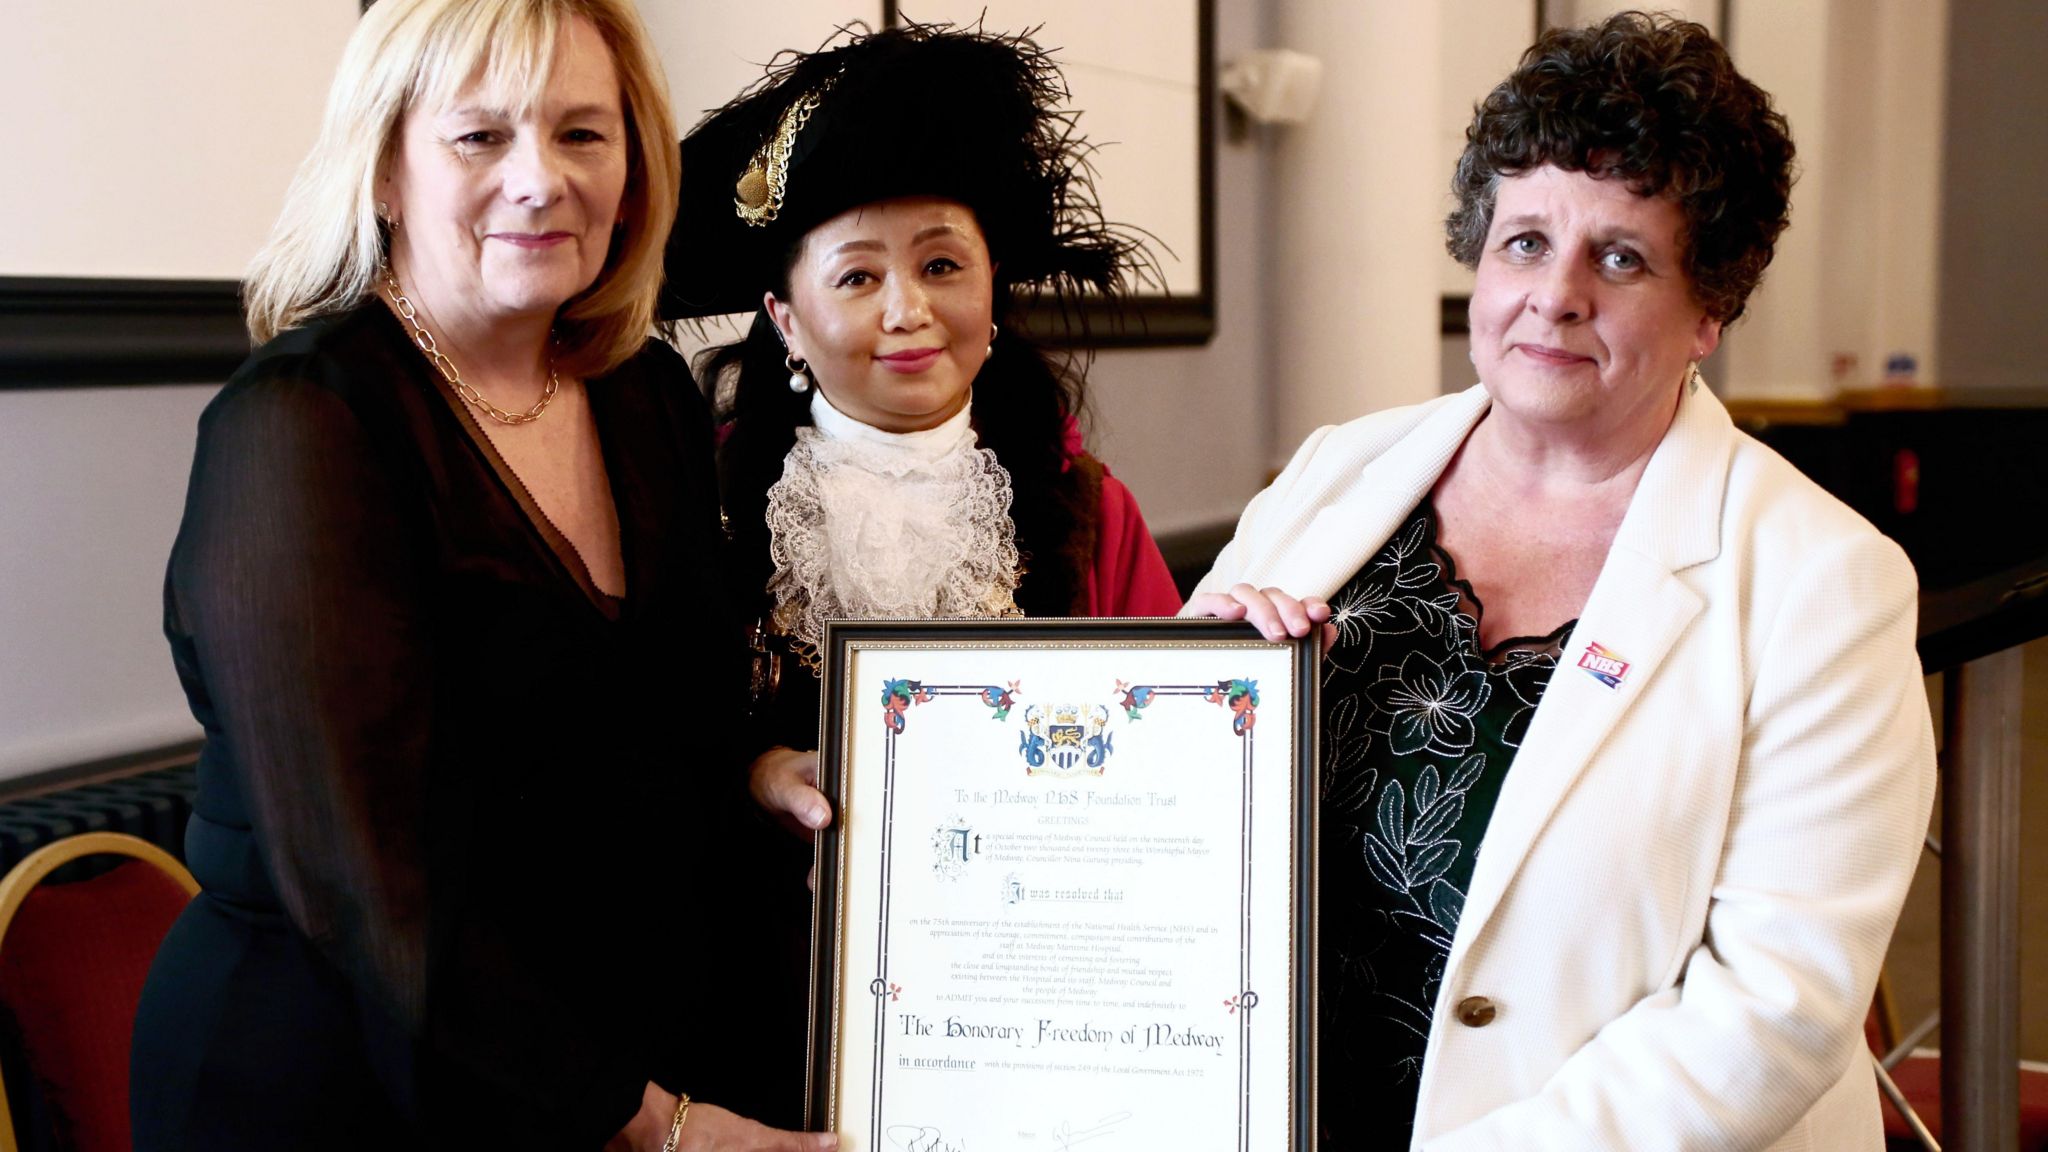 Jayne Black, Chief Executive of Medway NHS Foundation Trust, the Mayor of Medway, Cllr Nina Gurung, and Cllr Teresa Murray, Deputy Leader of Medway Council.